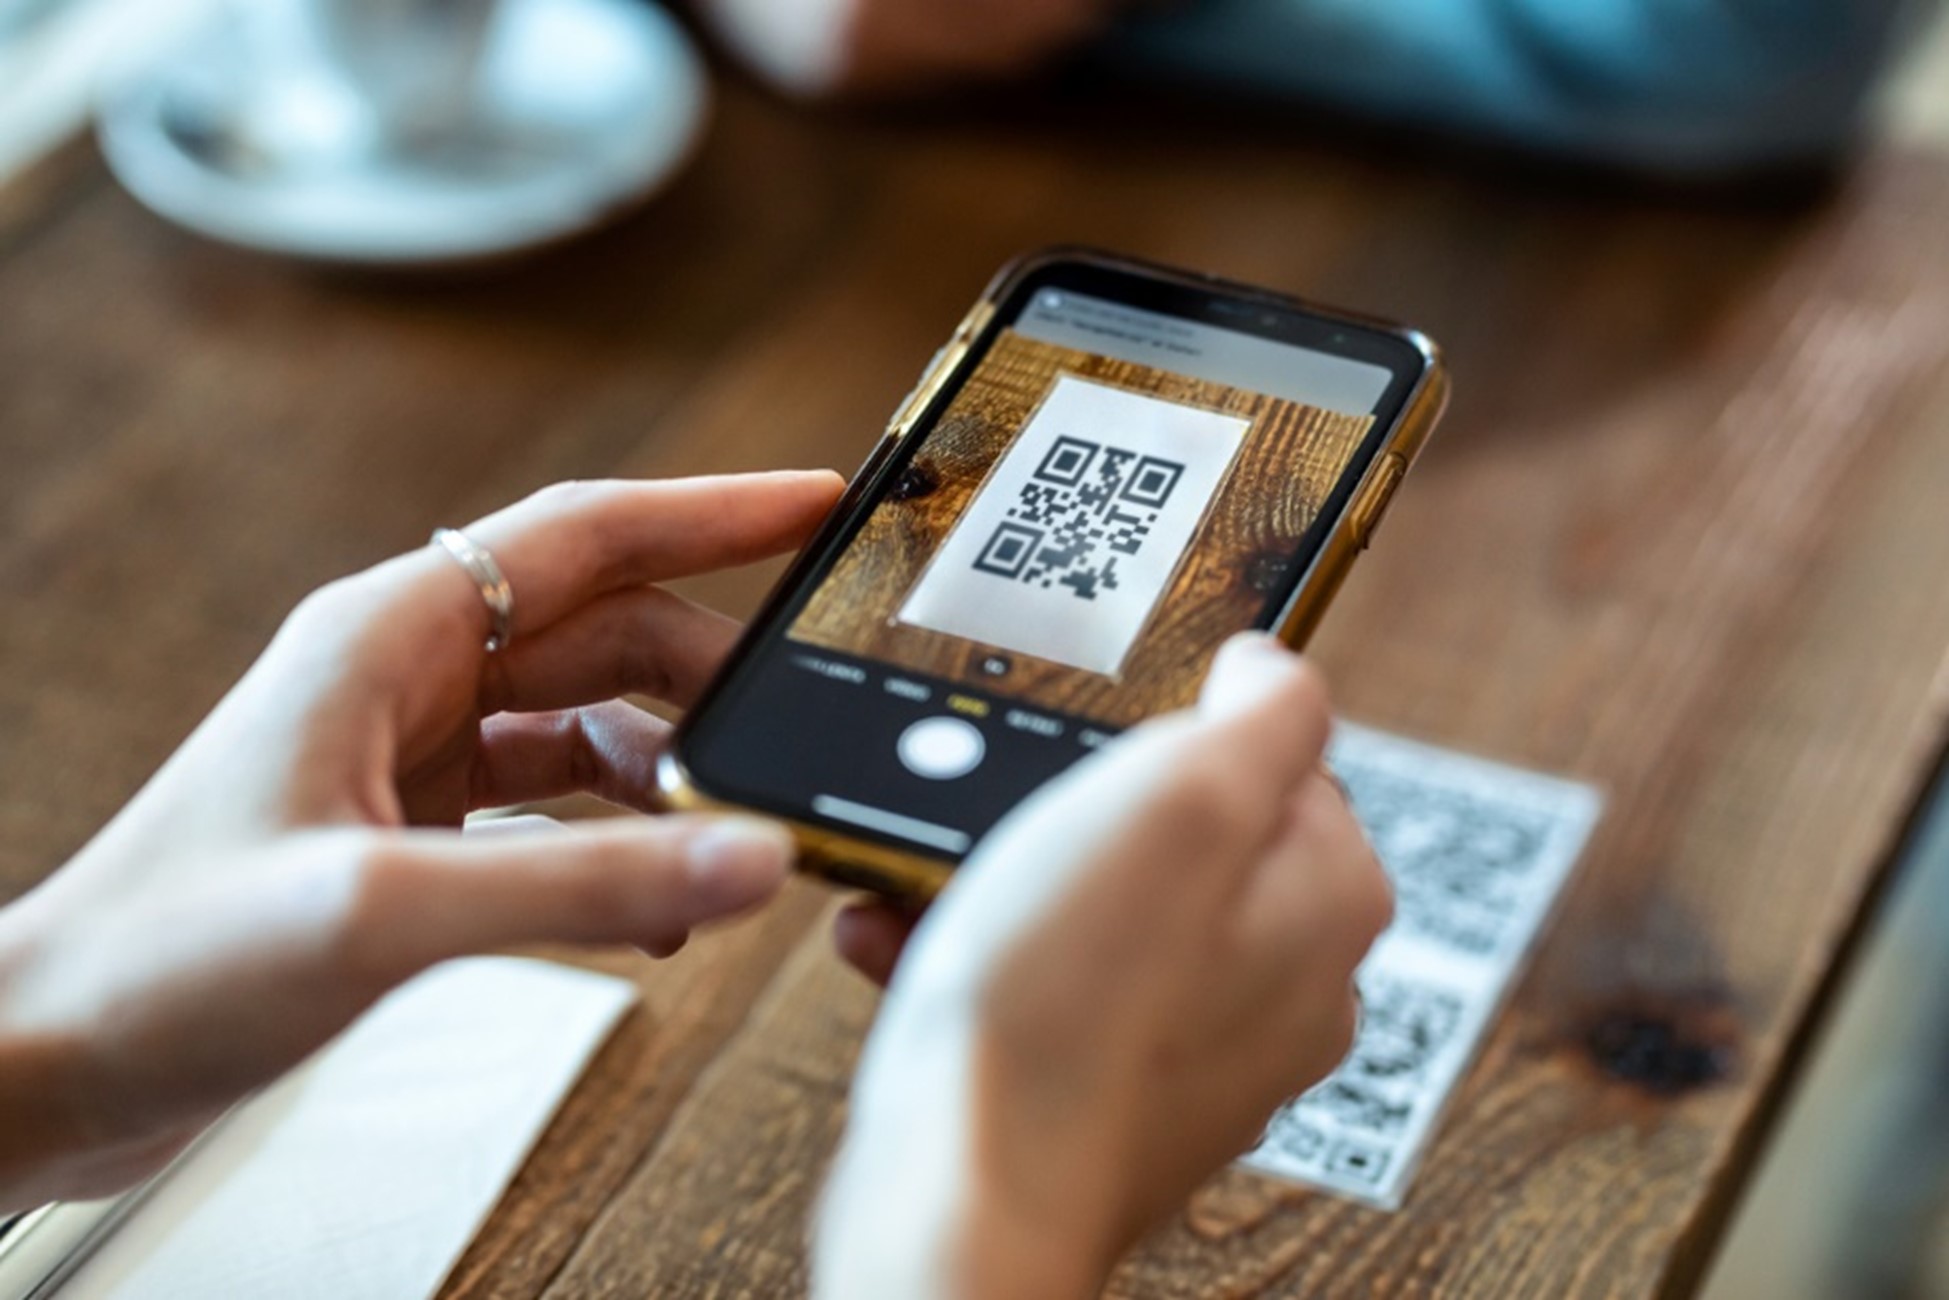 How Does The QR Scanner Work